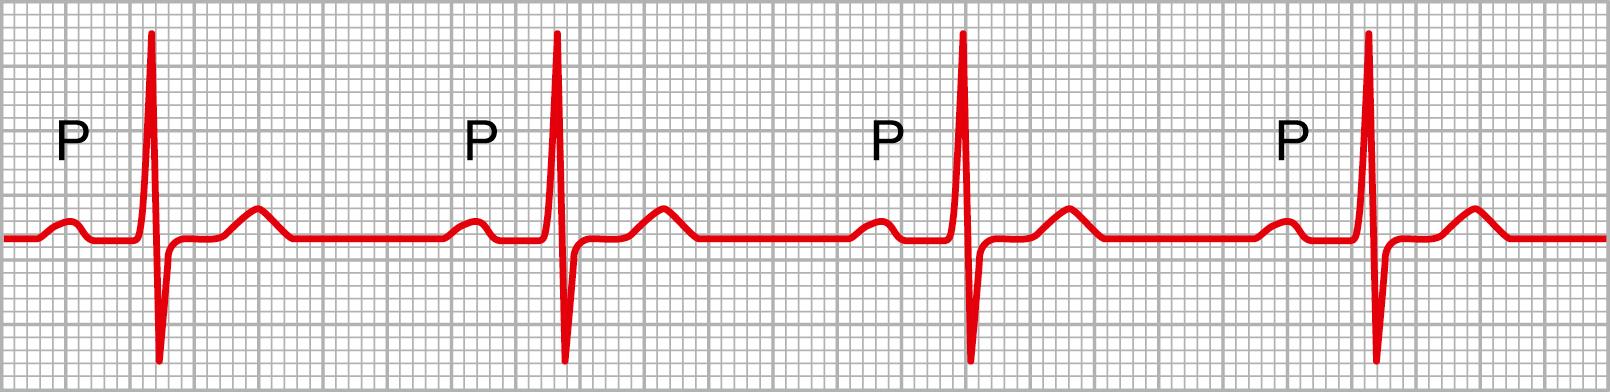 Figure 13-5, Prolonged P-R interval caused by first-degree atrioventricular heart block (lead II).